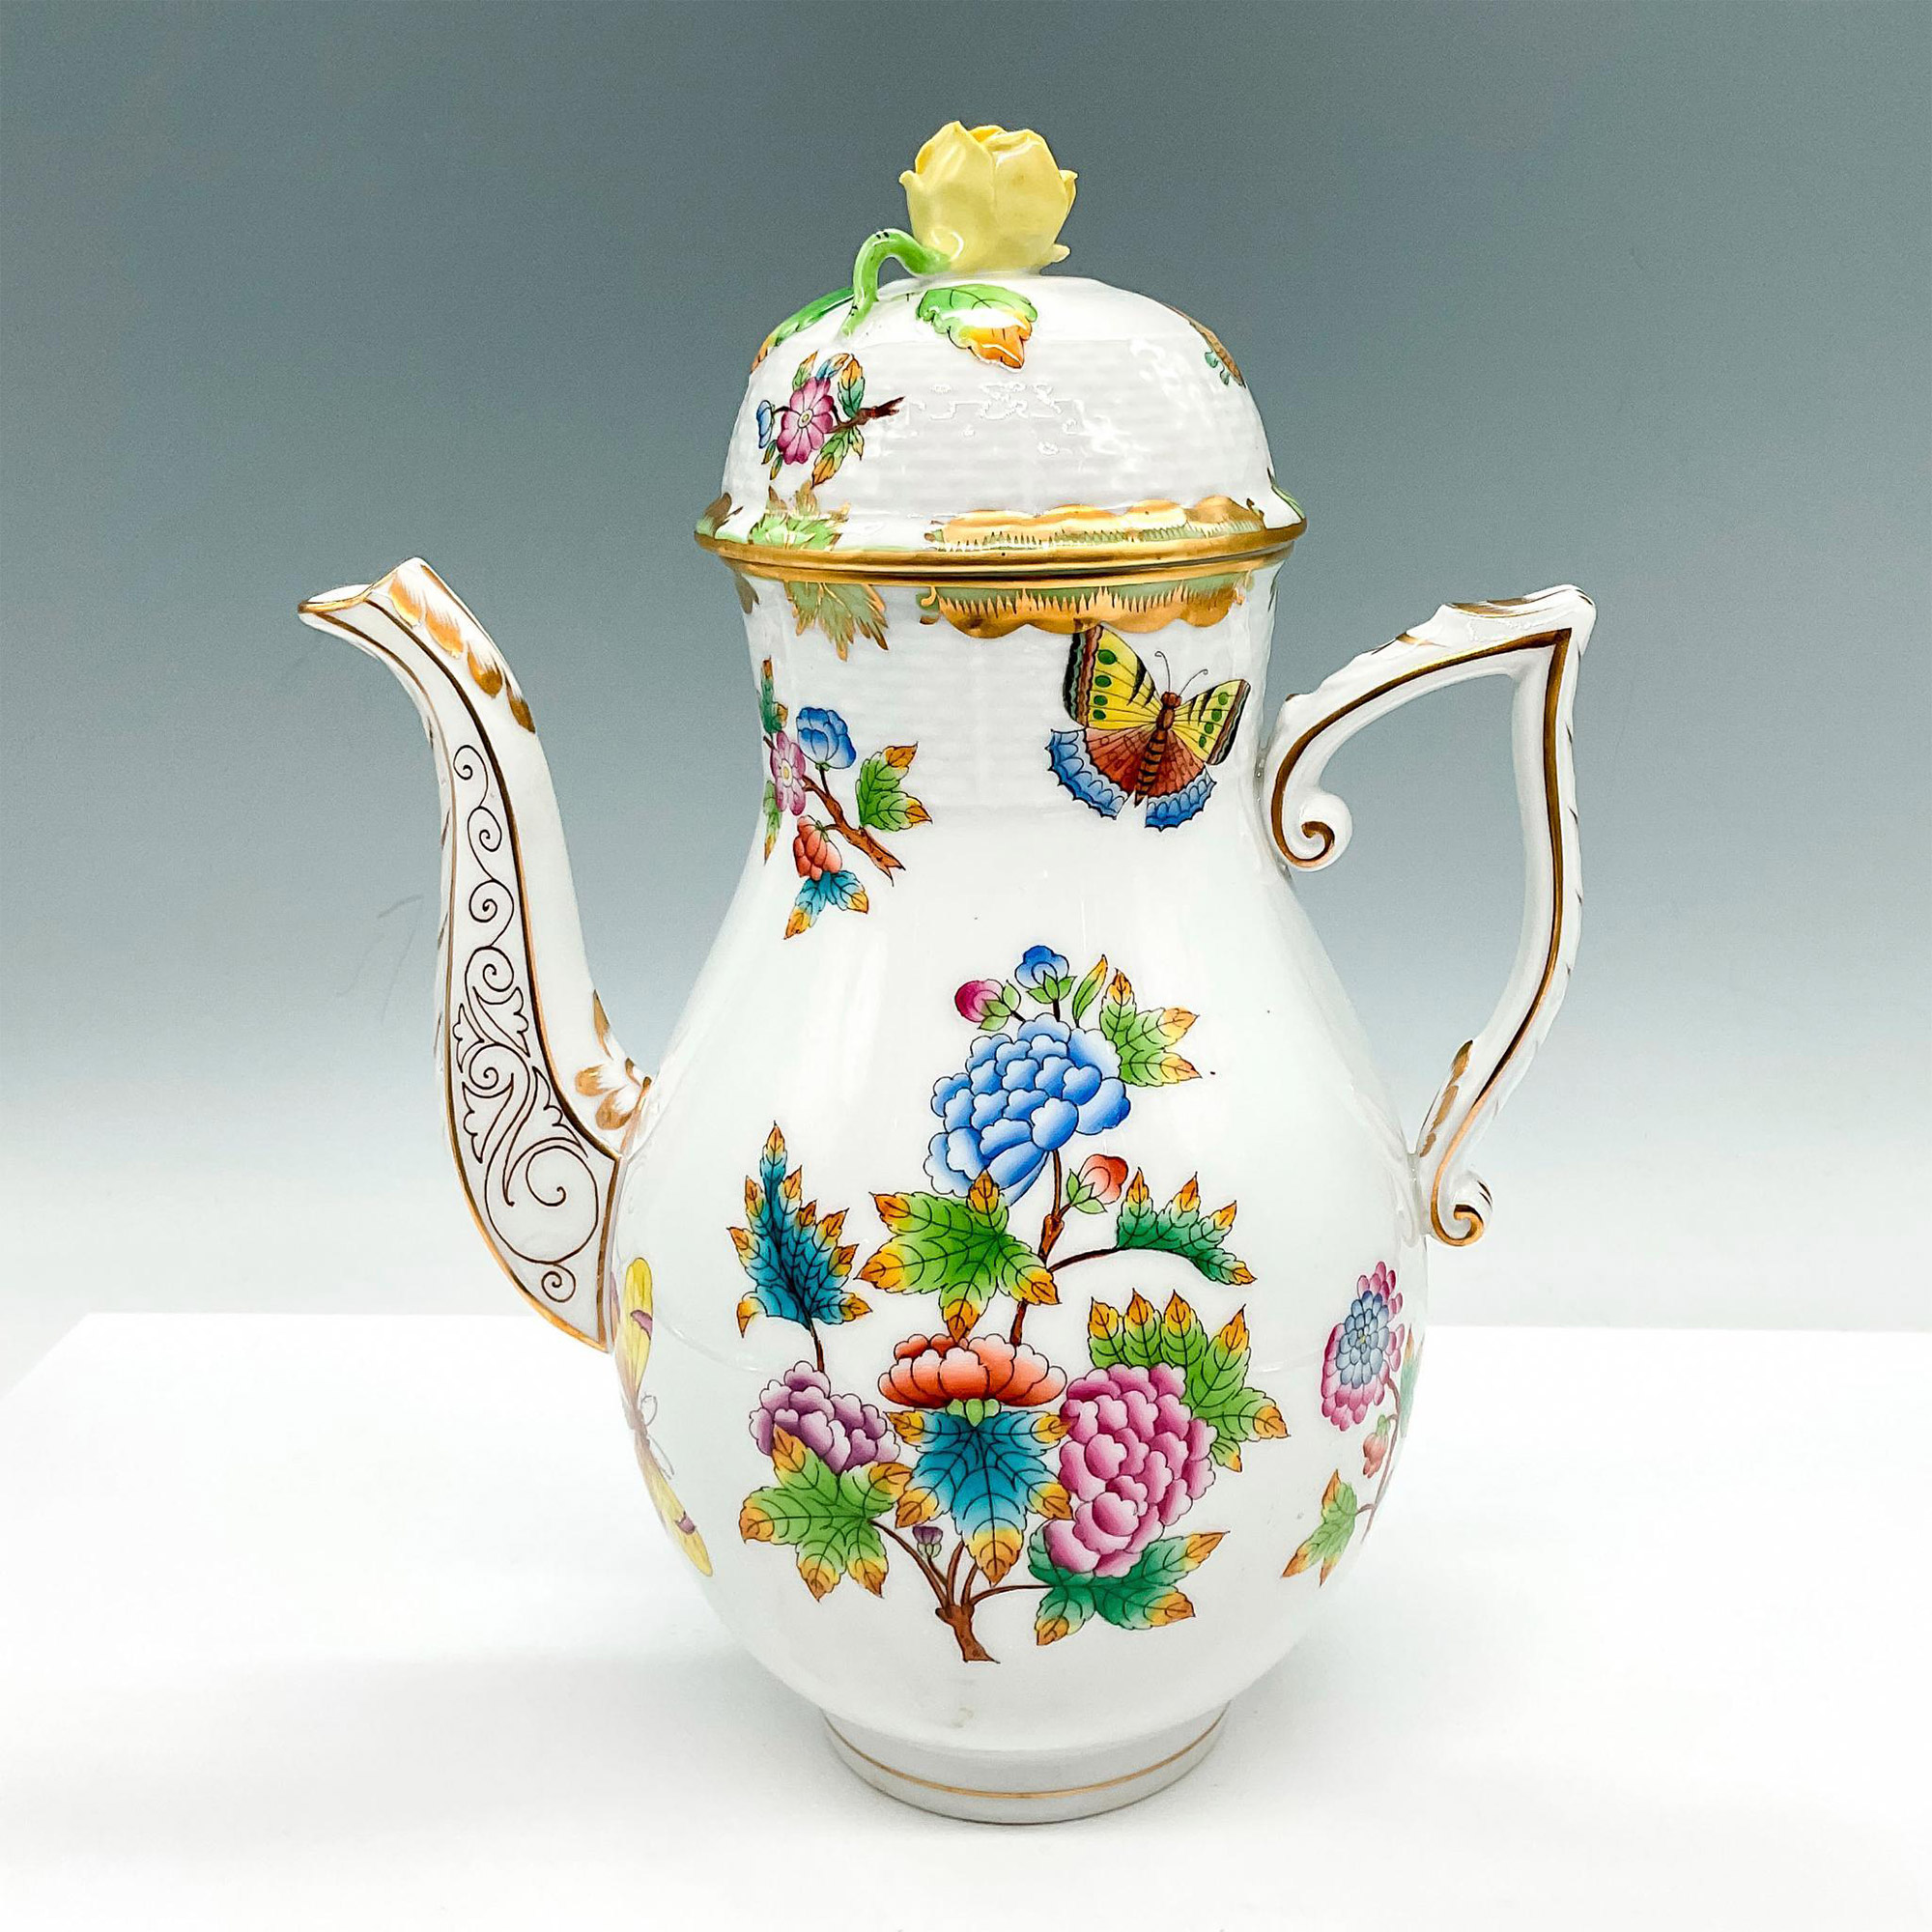 Herend Hungary Porcelain Coffee Pot with Lid, Queen Victoria - Image 2 of 3